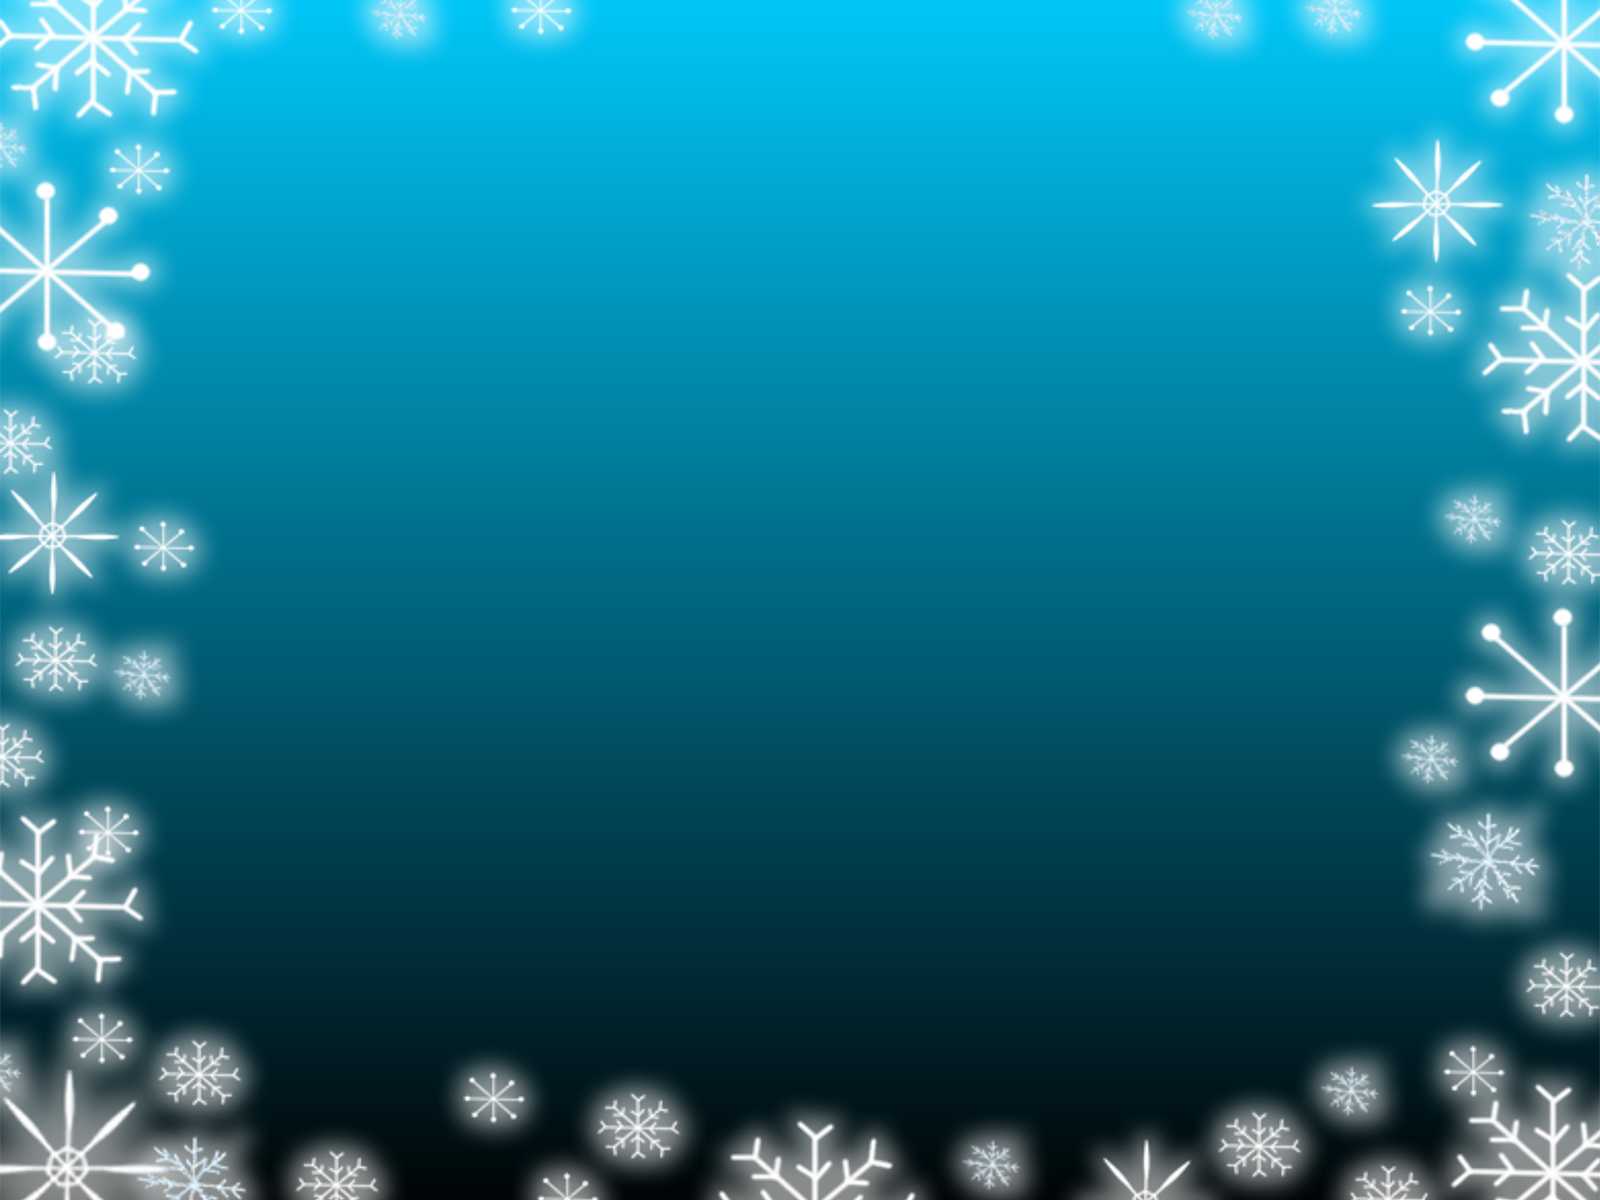 snow-backgrounds-ppt-grounds-with-snow-powerpoint-template